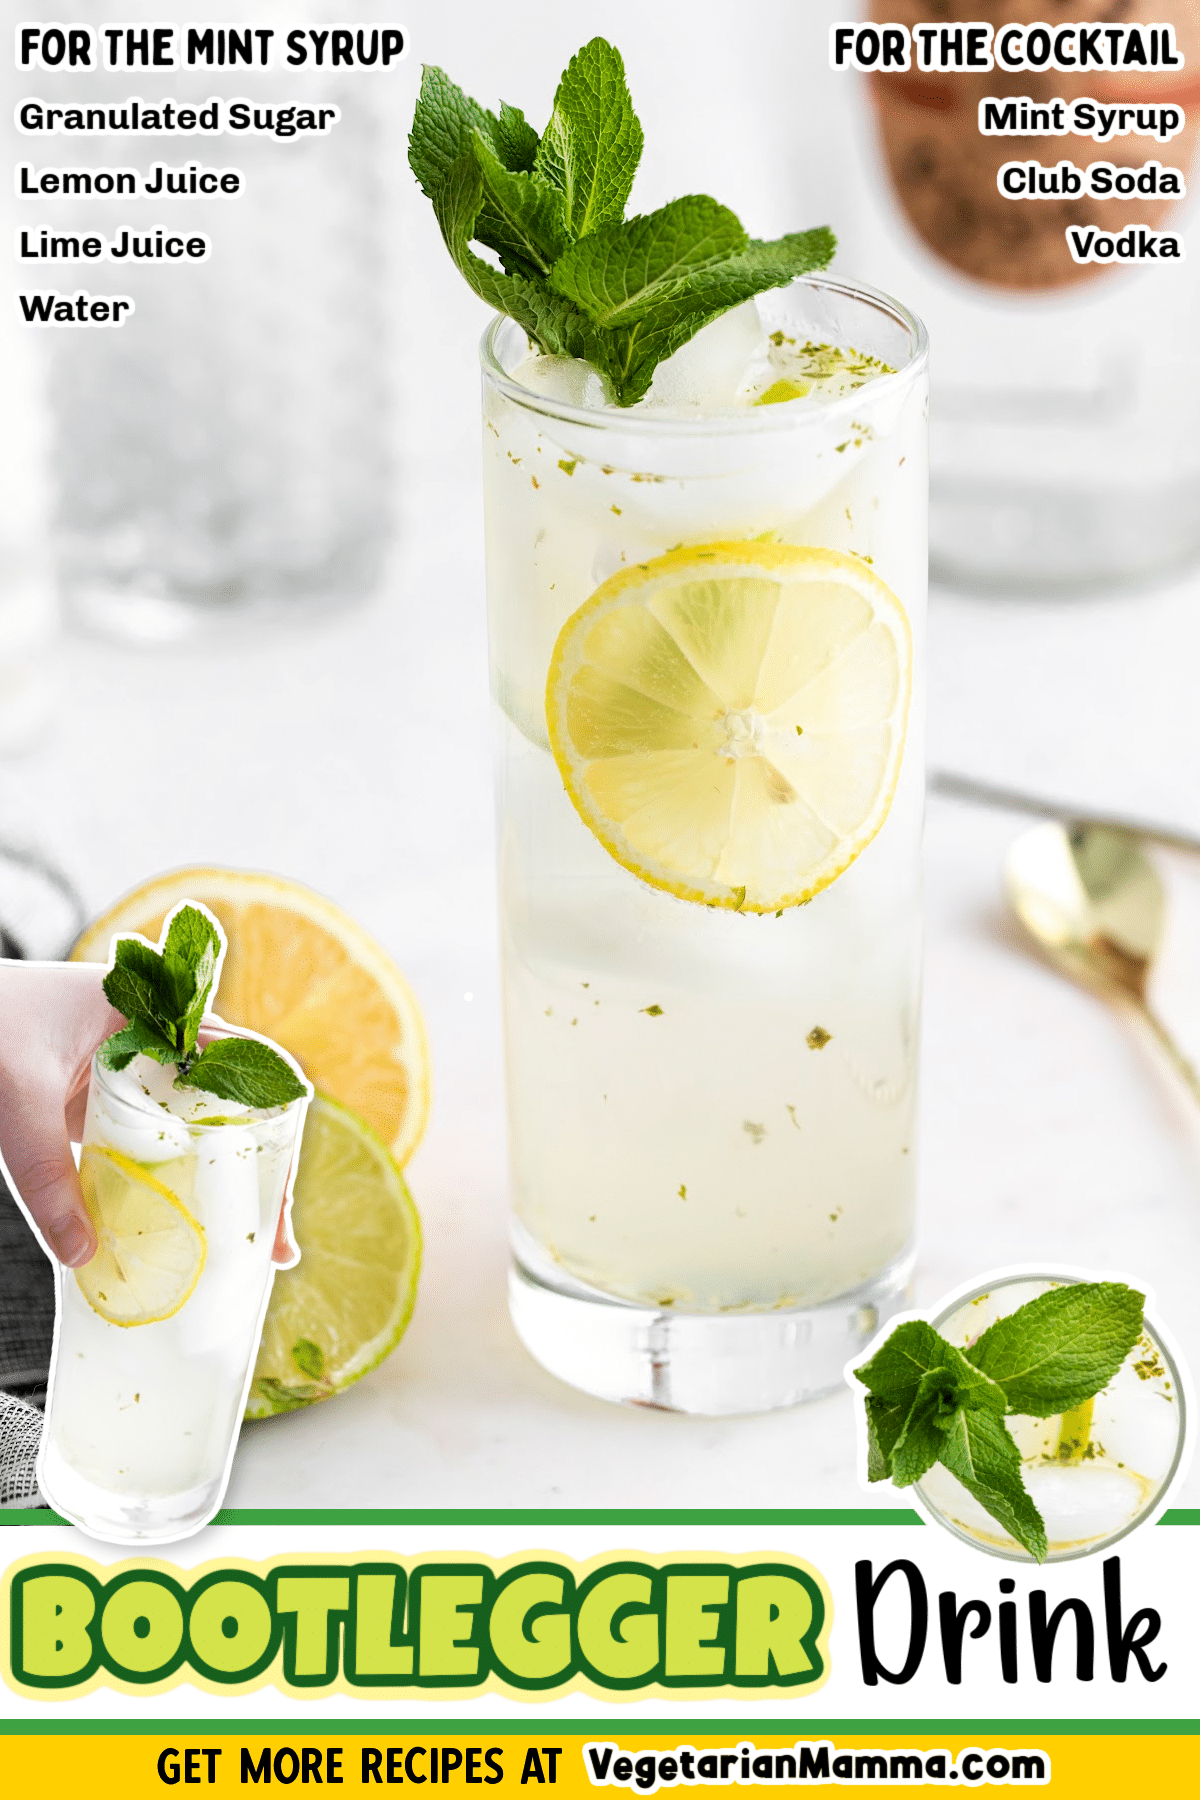 The Bootlegger drink was made famous in Minnesota! One sip and you will quickly fall in love with this minty-lemon-lime combination!